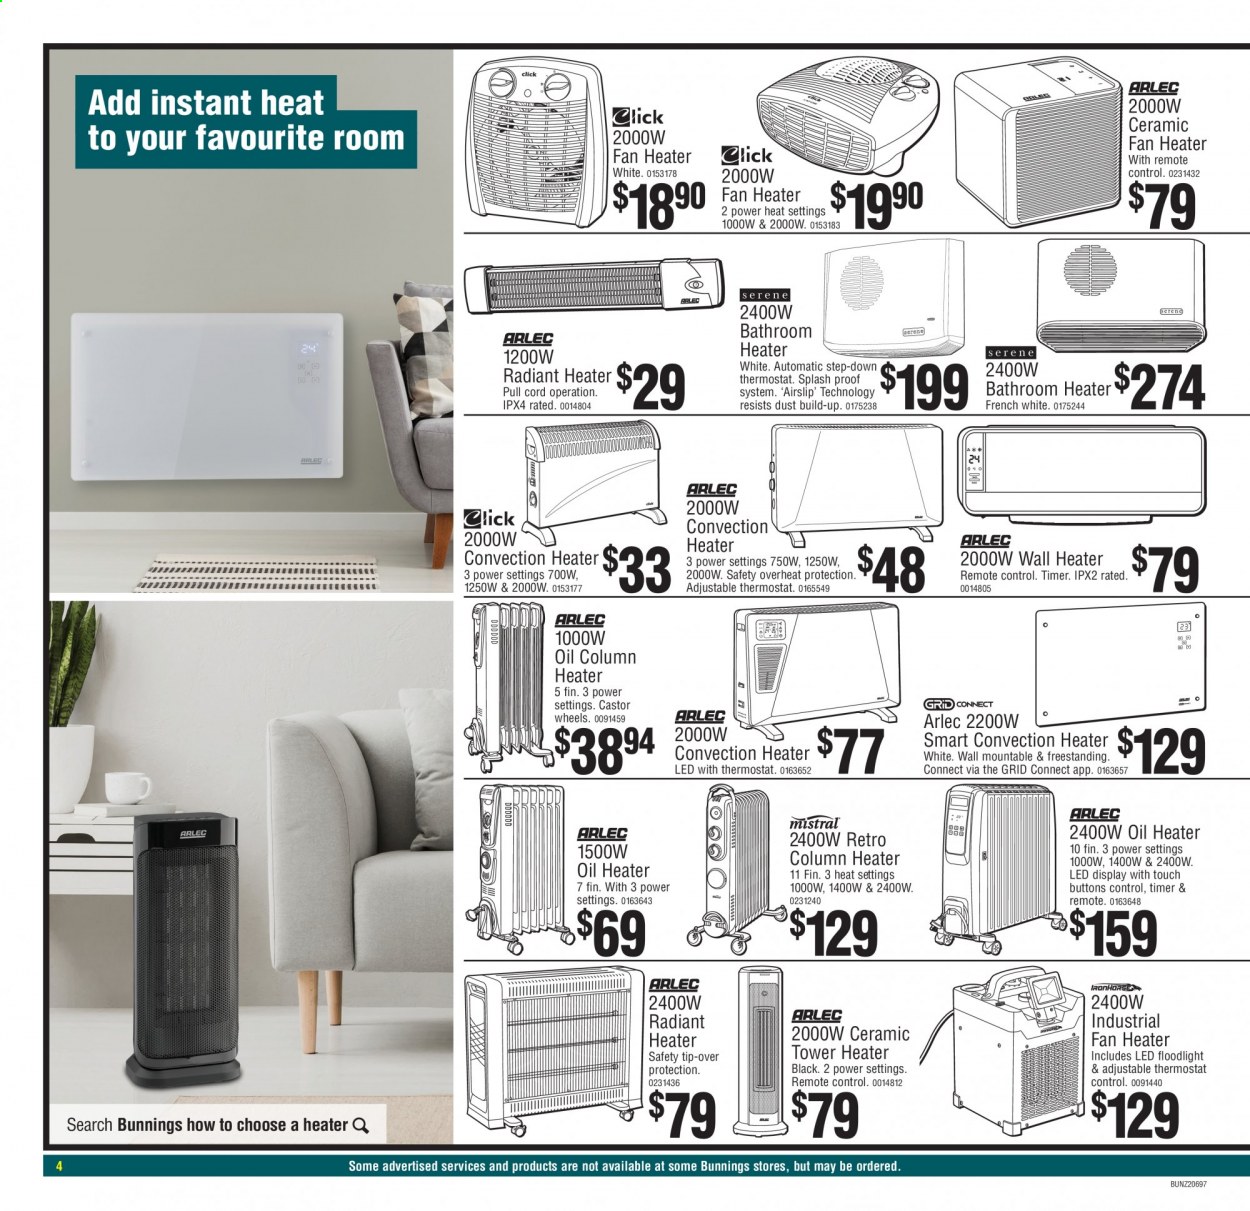 thumbnail - Bunnings Warehouse mailer - 14.05.2021 - 06.06.2021 - Sales products - floodlight, timer, heater, fan heater. Page 4.